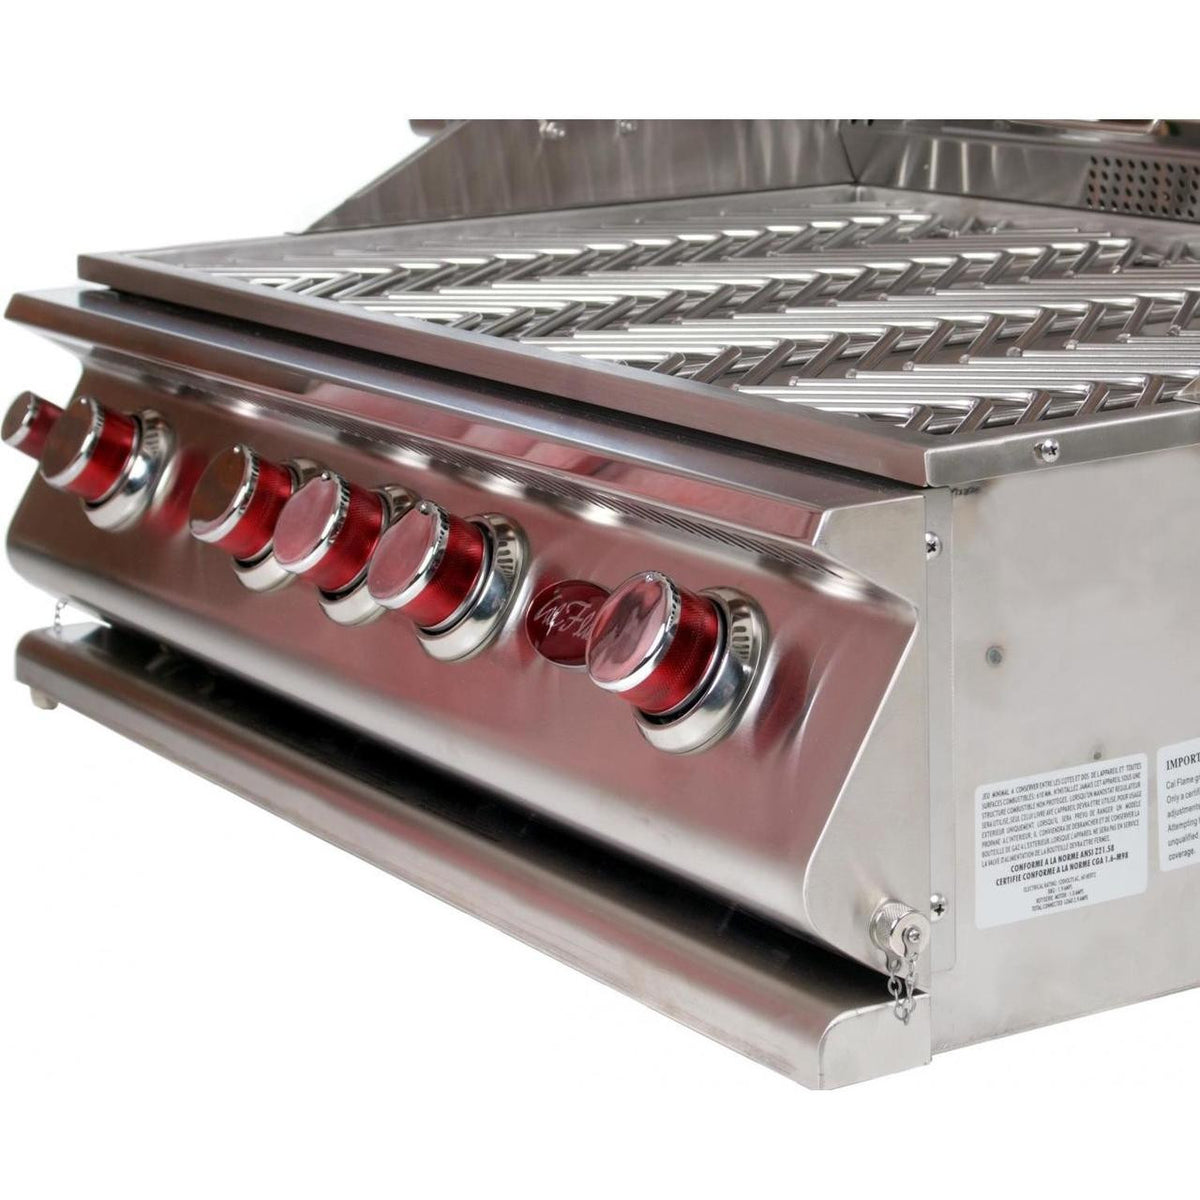 Cal Flame BBQ Built In Grills Convection 5 BURNER  - LP